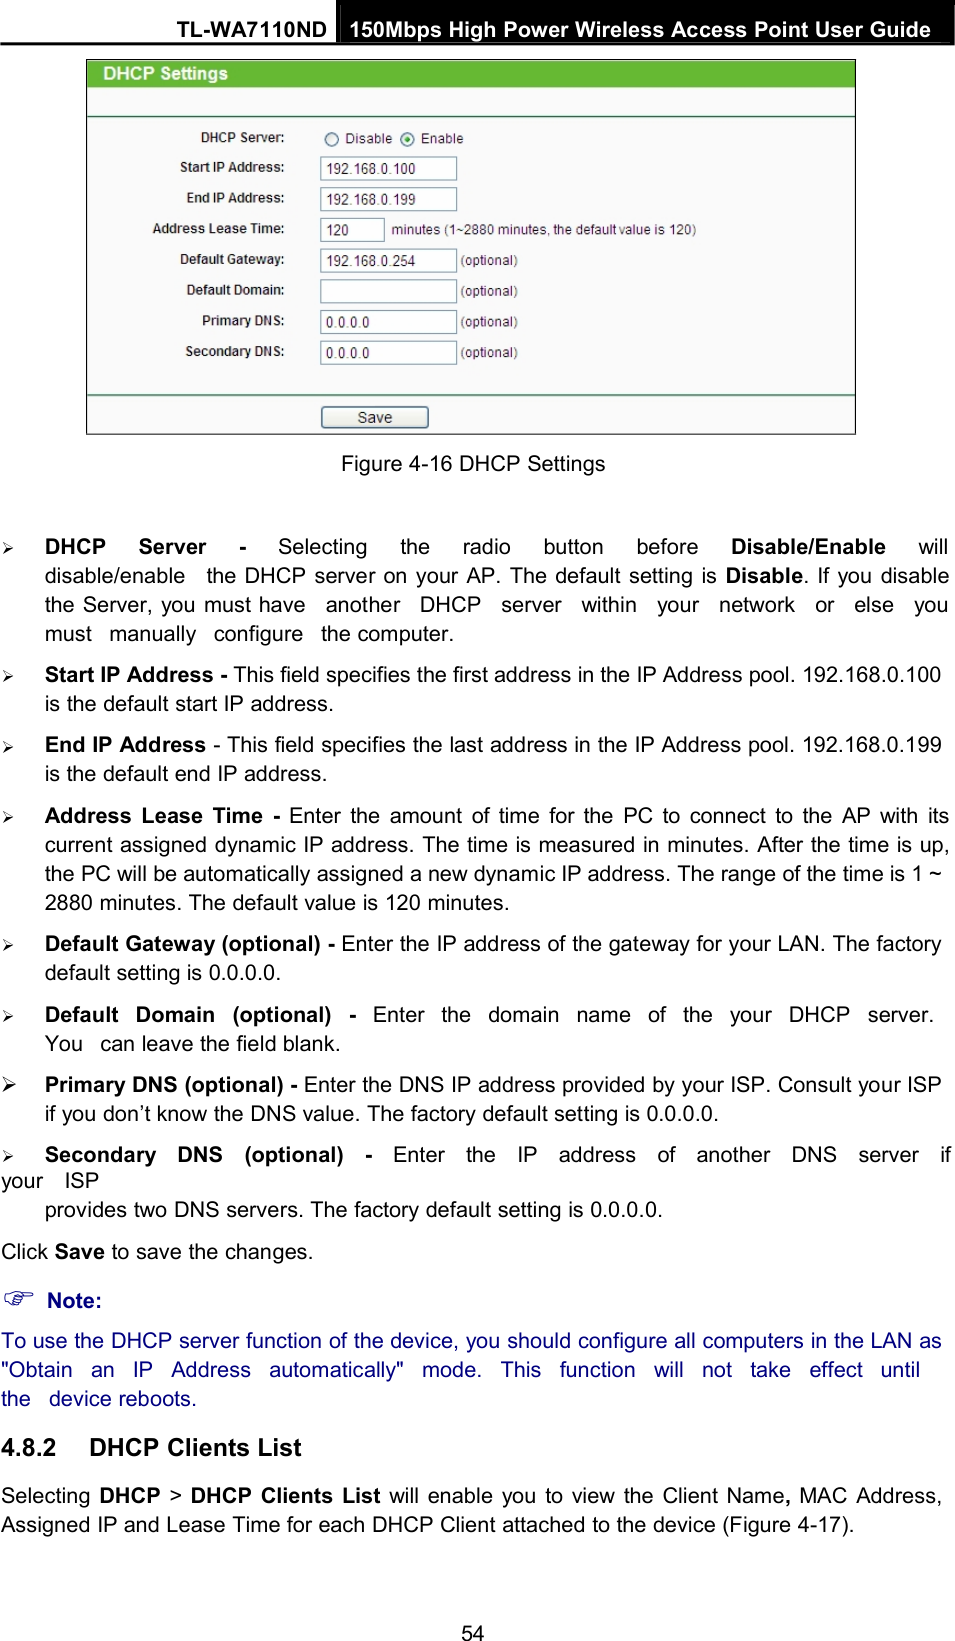 TL-WA7110ND 150Mbps High Power Wireless Access Point User GuideFigure 4-16 DHCP SettingsDHCP Server - Selecting the radio button before Disable/Enable willdisable/enable the DHCP server on your AP. The default setting is Disable. If you disablethe Server, you must have another DHCP server within your network or else youmust manually configure the computer.Start IP Address - This field specifies the first address in the IP Address pool. 192.168.0.100is the default start IP address.End IP Address - This field specifies the last address in the IP Address pool. 192.168.0.199is the default end IP address.Address Lease Time - Enter the amount of time for the PC to connect to the AP with itscurrent assigned dynamic IP address. The time is measured in minutes. After the time is up,the PC will be automatically assigned a new dynamic IP address. The range of the time is 1 ~2880 minutes. The default value is 120 minutes.Default Gateway (optional) - Enter the IP address of the gateway for your LAN. The factorydefault setting is 0.0.0.0.Default Domain (optional) - Enter the domain name of the your DHCP server.You can leave the field blank.Primary DNS (optional) - Enter the DNS IP address provided by your ISP. Consult your ISPif you don’t know the DNS value. The factory default setting is 0.0.0.0.Secondary DNS (optional) - Enter the IP address of another DNS server ifyour ISPprovides two DNS servers. The factory default setting is 0.0.0.0.Click Save to save the changes.Note:To use the DHCP server function of the device, you should configure all computers in the LAN as&quot;Obtain an IP Address automatically&quot; mode. This function will not take effect untilthe device reboots.4.8.2 DHCP Clients ListSelecting DHCP &gt;DHCP Clients List will enable you to view the Client Name,MAC Address,Assigned IP and Lease Time for each DHCP Client attached to the device (Figure 4-17).54